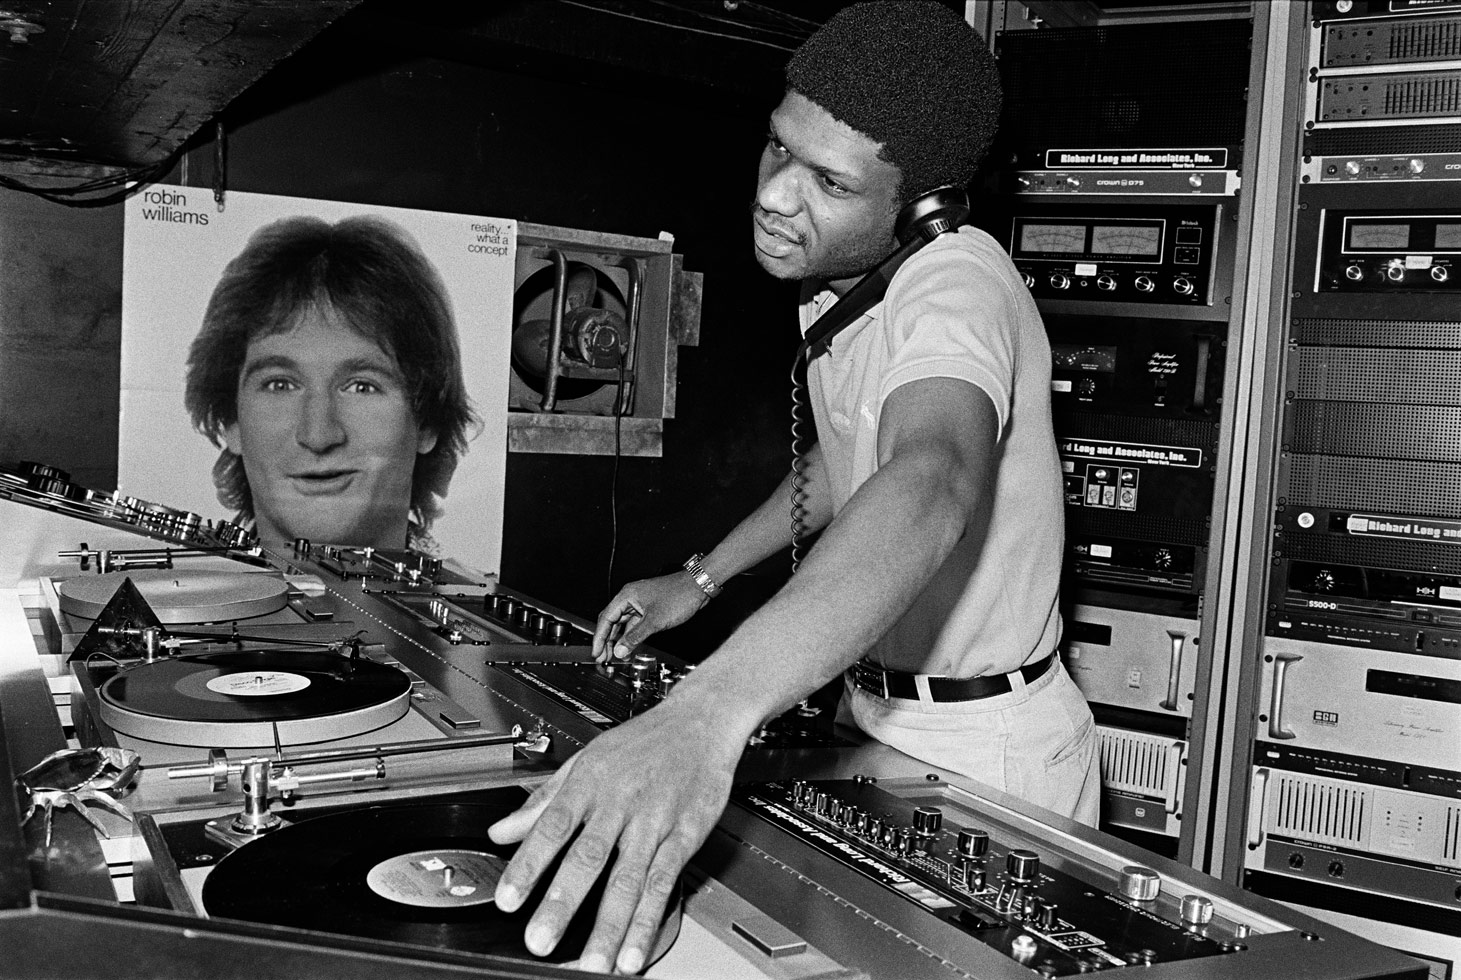 Larry Levan during his decade-long residence at Paradise Garage.